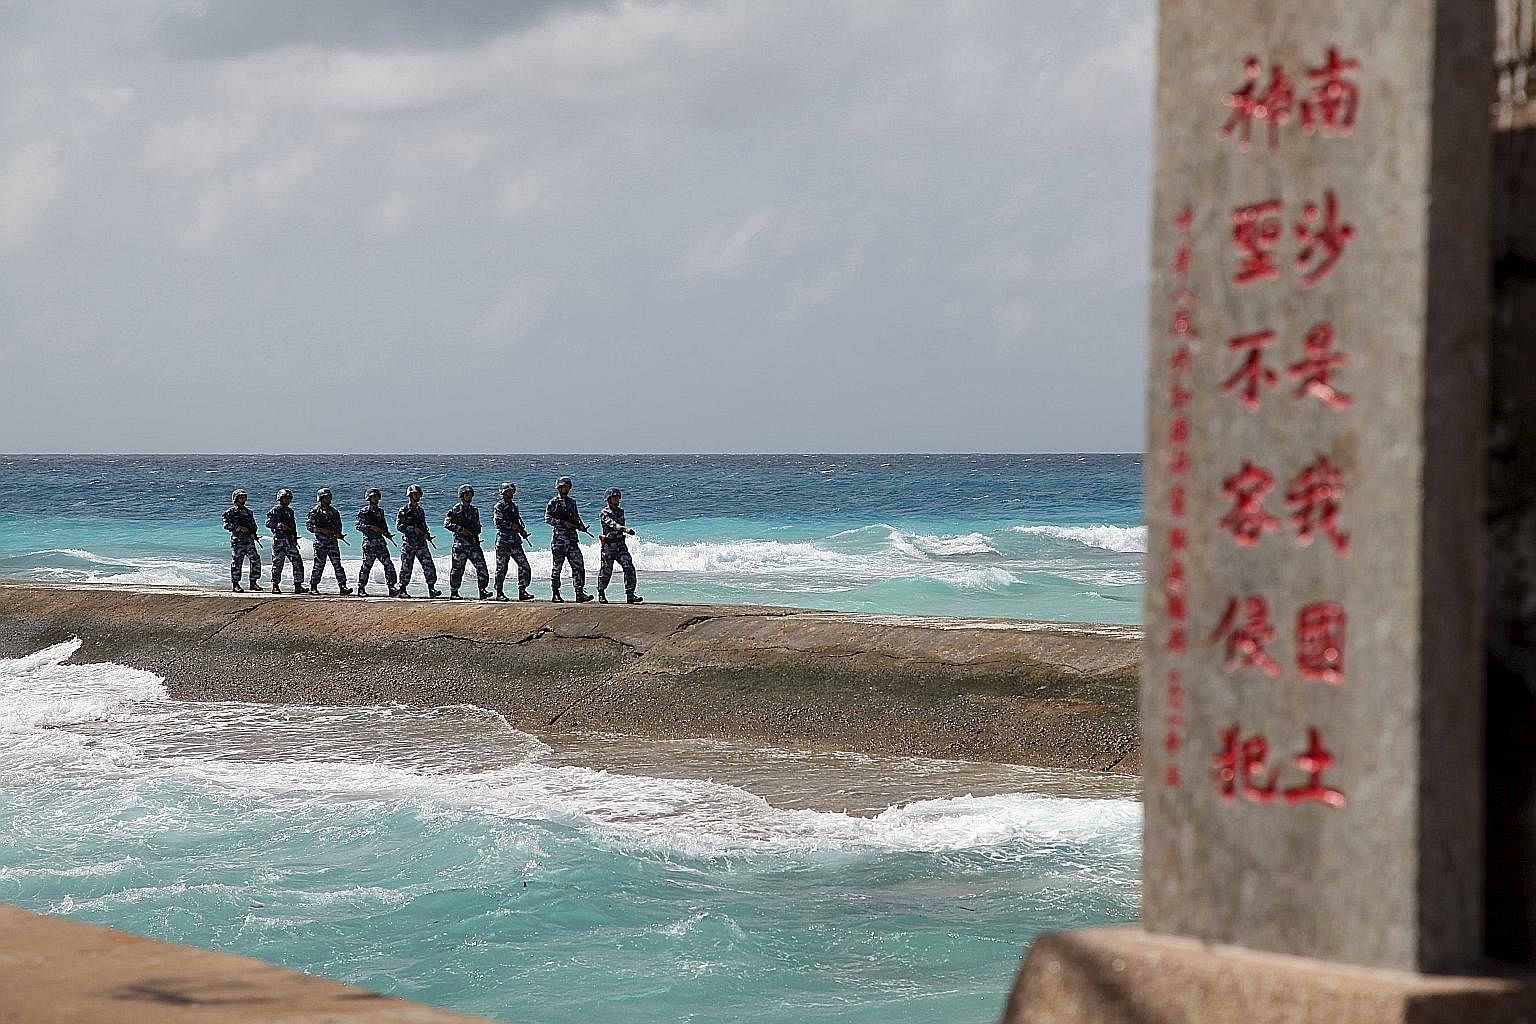 Chinese soldiers on the Spratly Islands, known in China as the Nansha Islands, earlier this year. The sign reads: "Nansha is our national land, sacred and inviolable". China's adventurism in the South China Sea has prompted a change in Australian pol